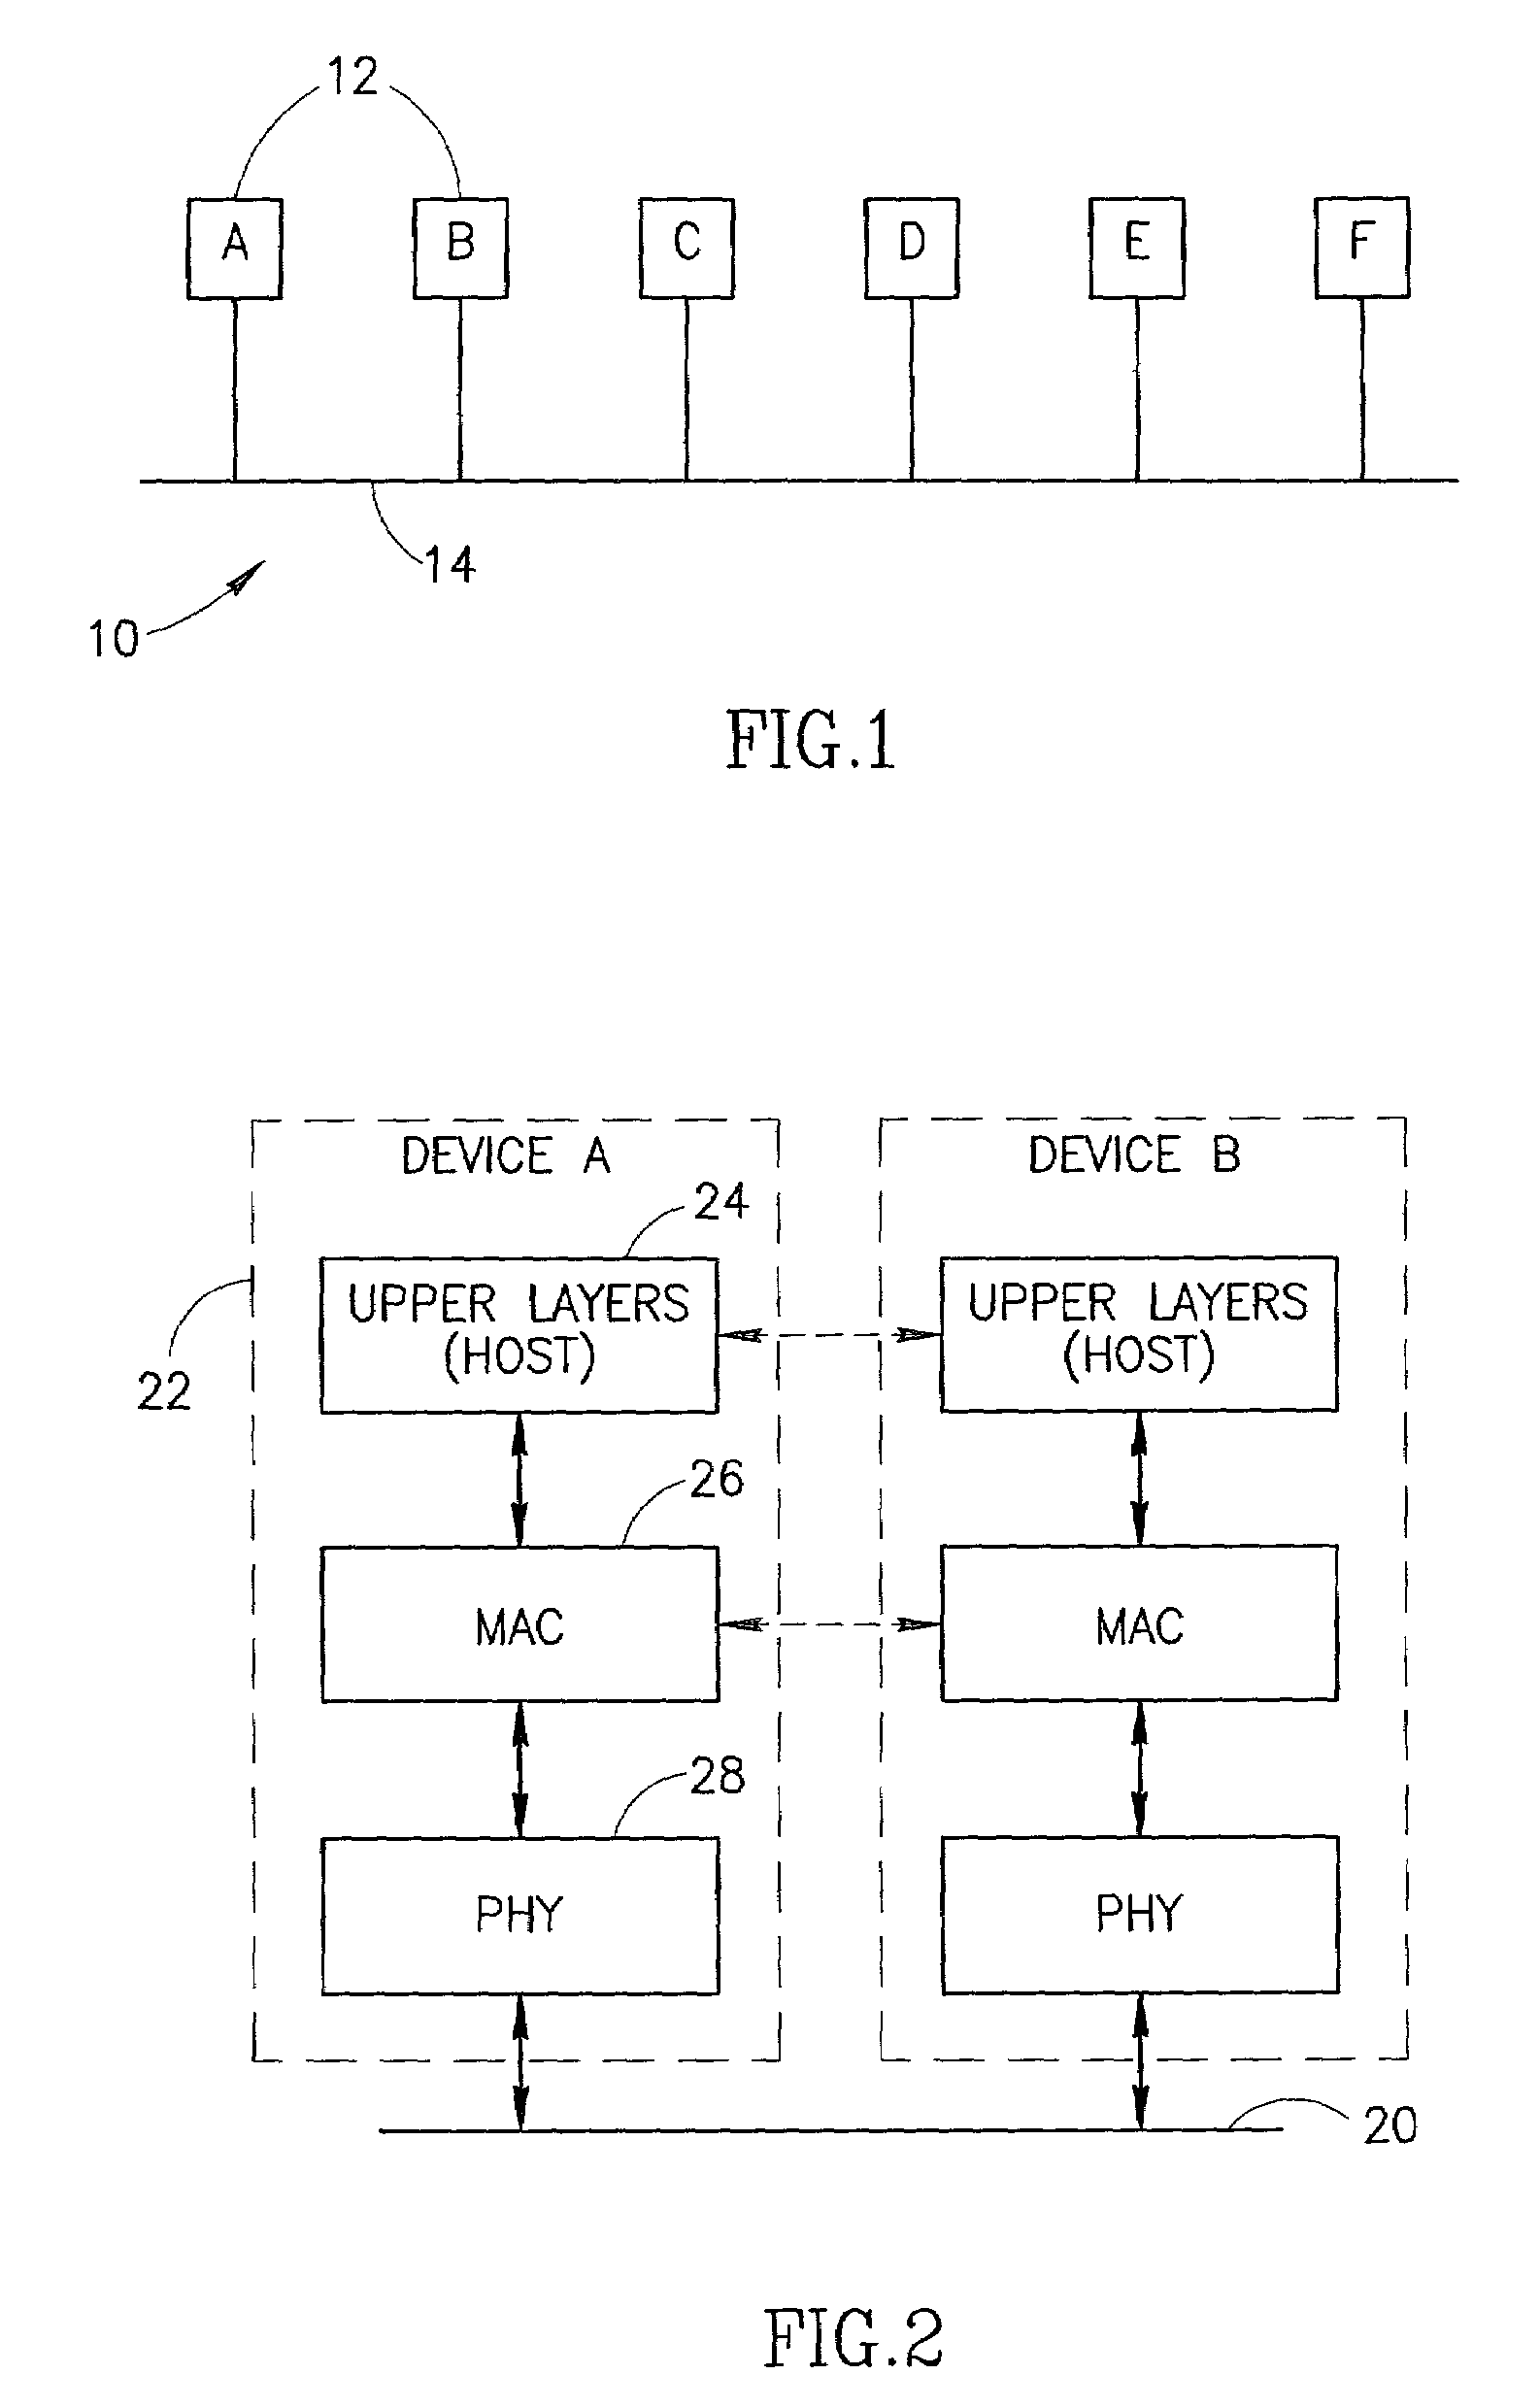 Channel access method for powerline carrier based media access control protocol